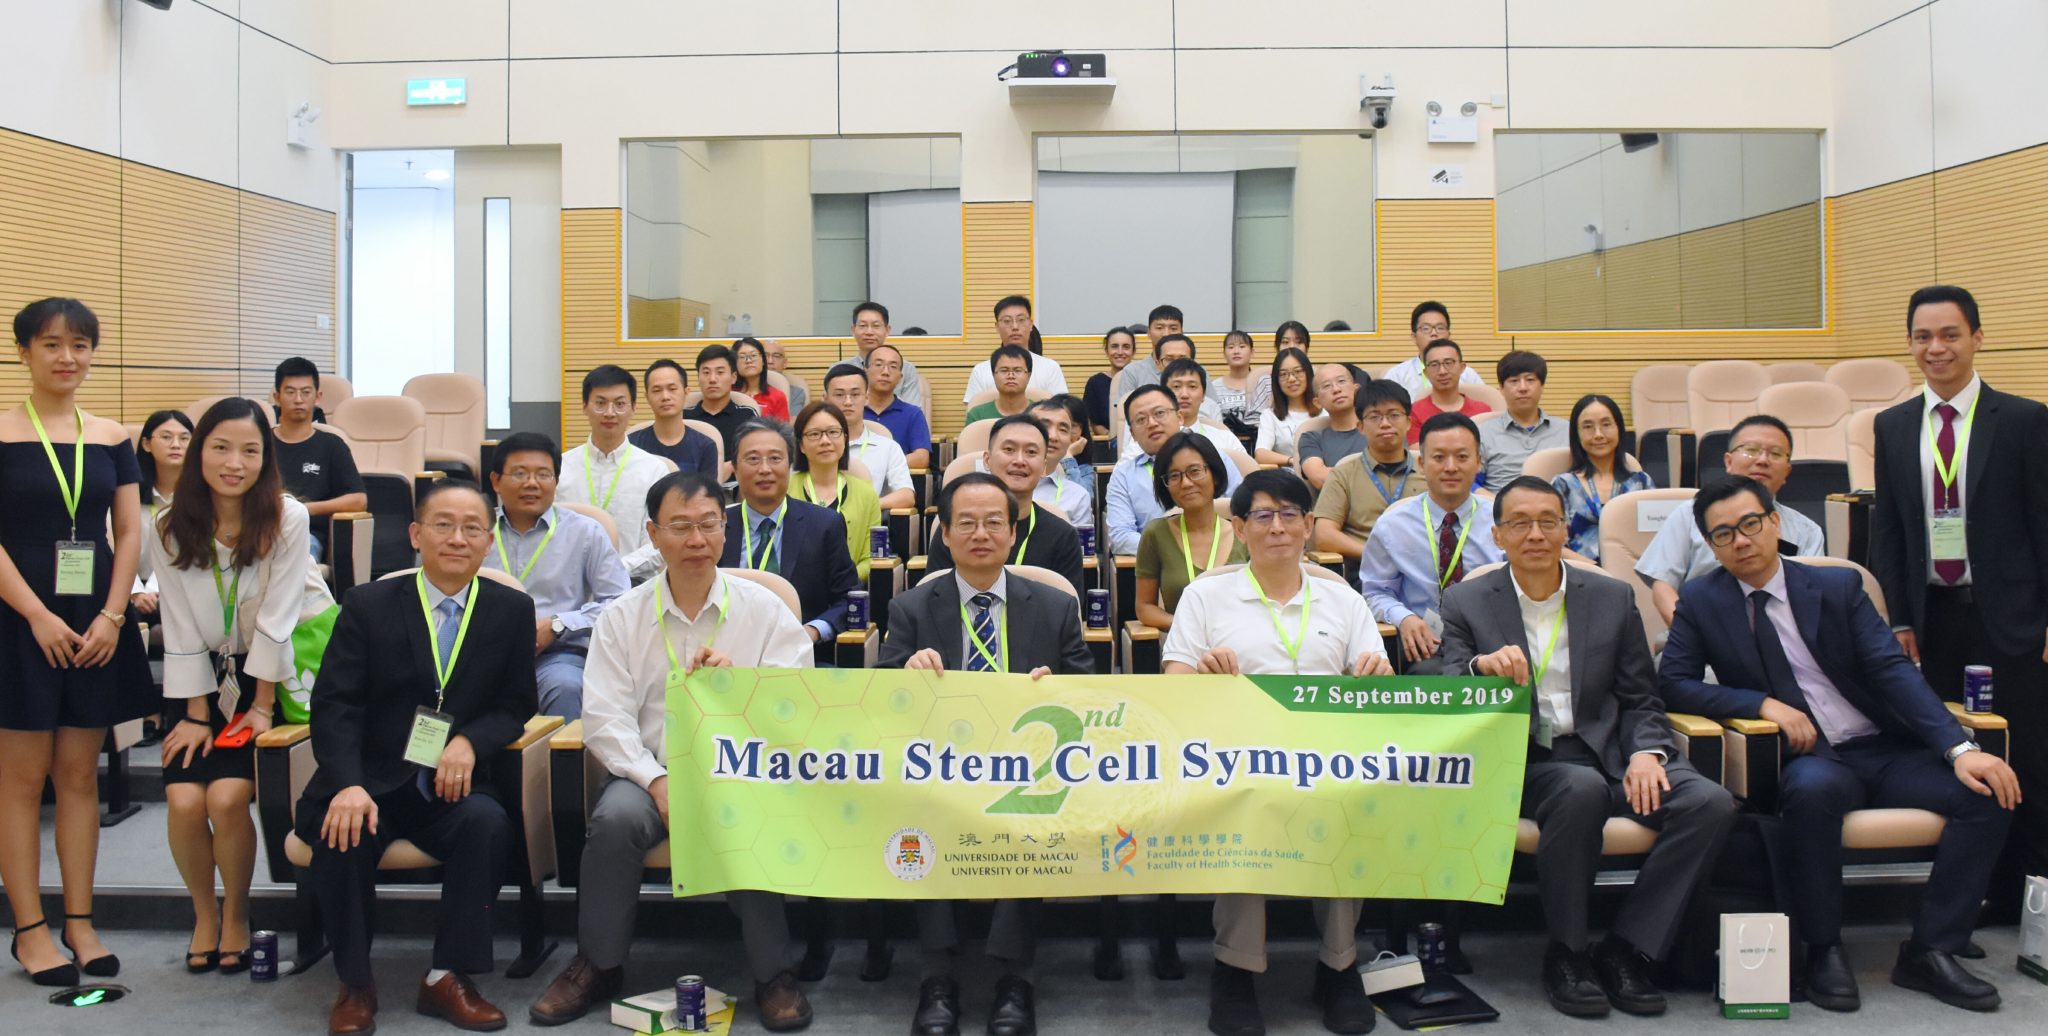 Over 100 experts from around the globe discuss latest stem cell technologies at UM